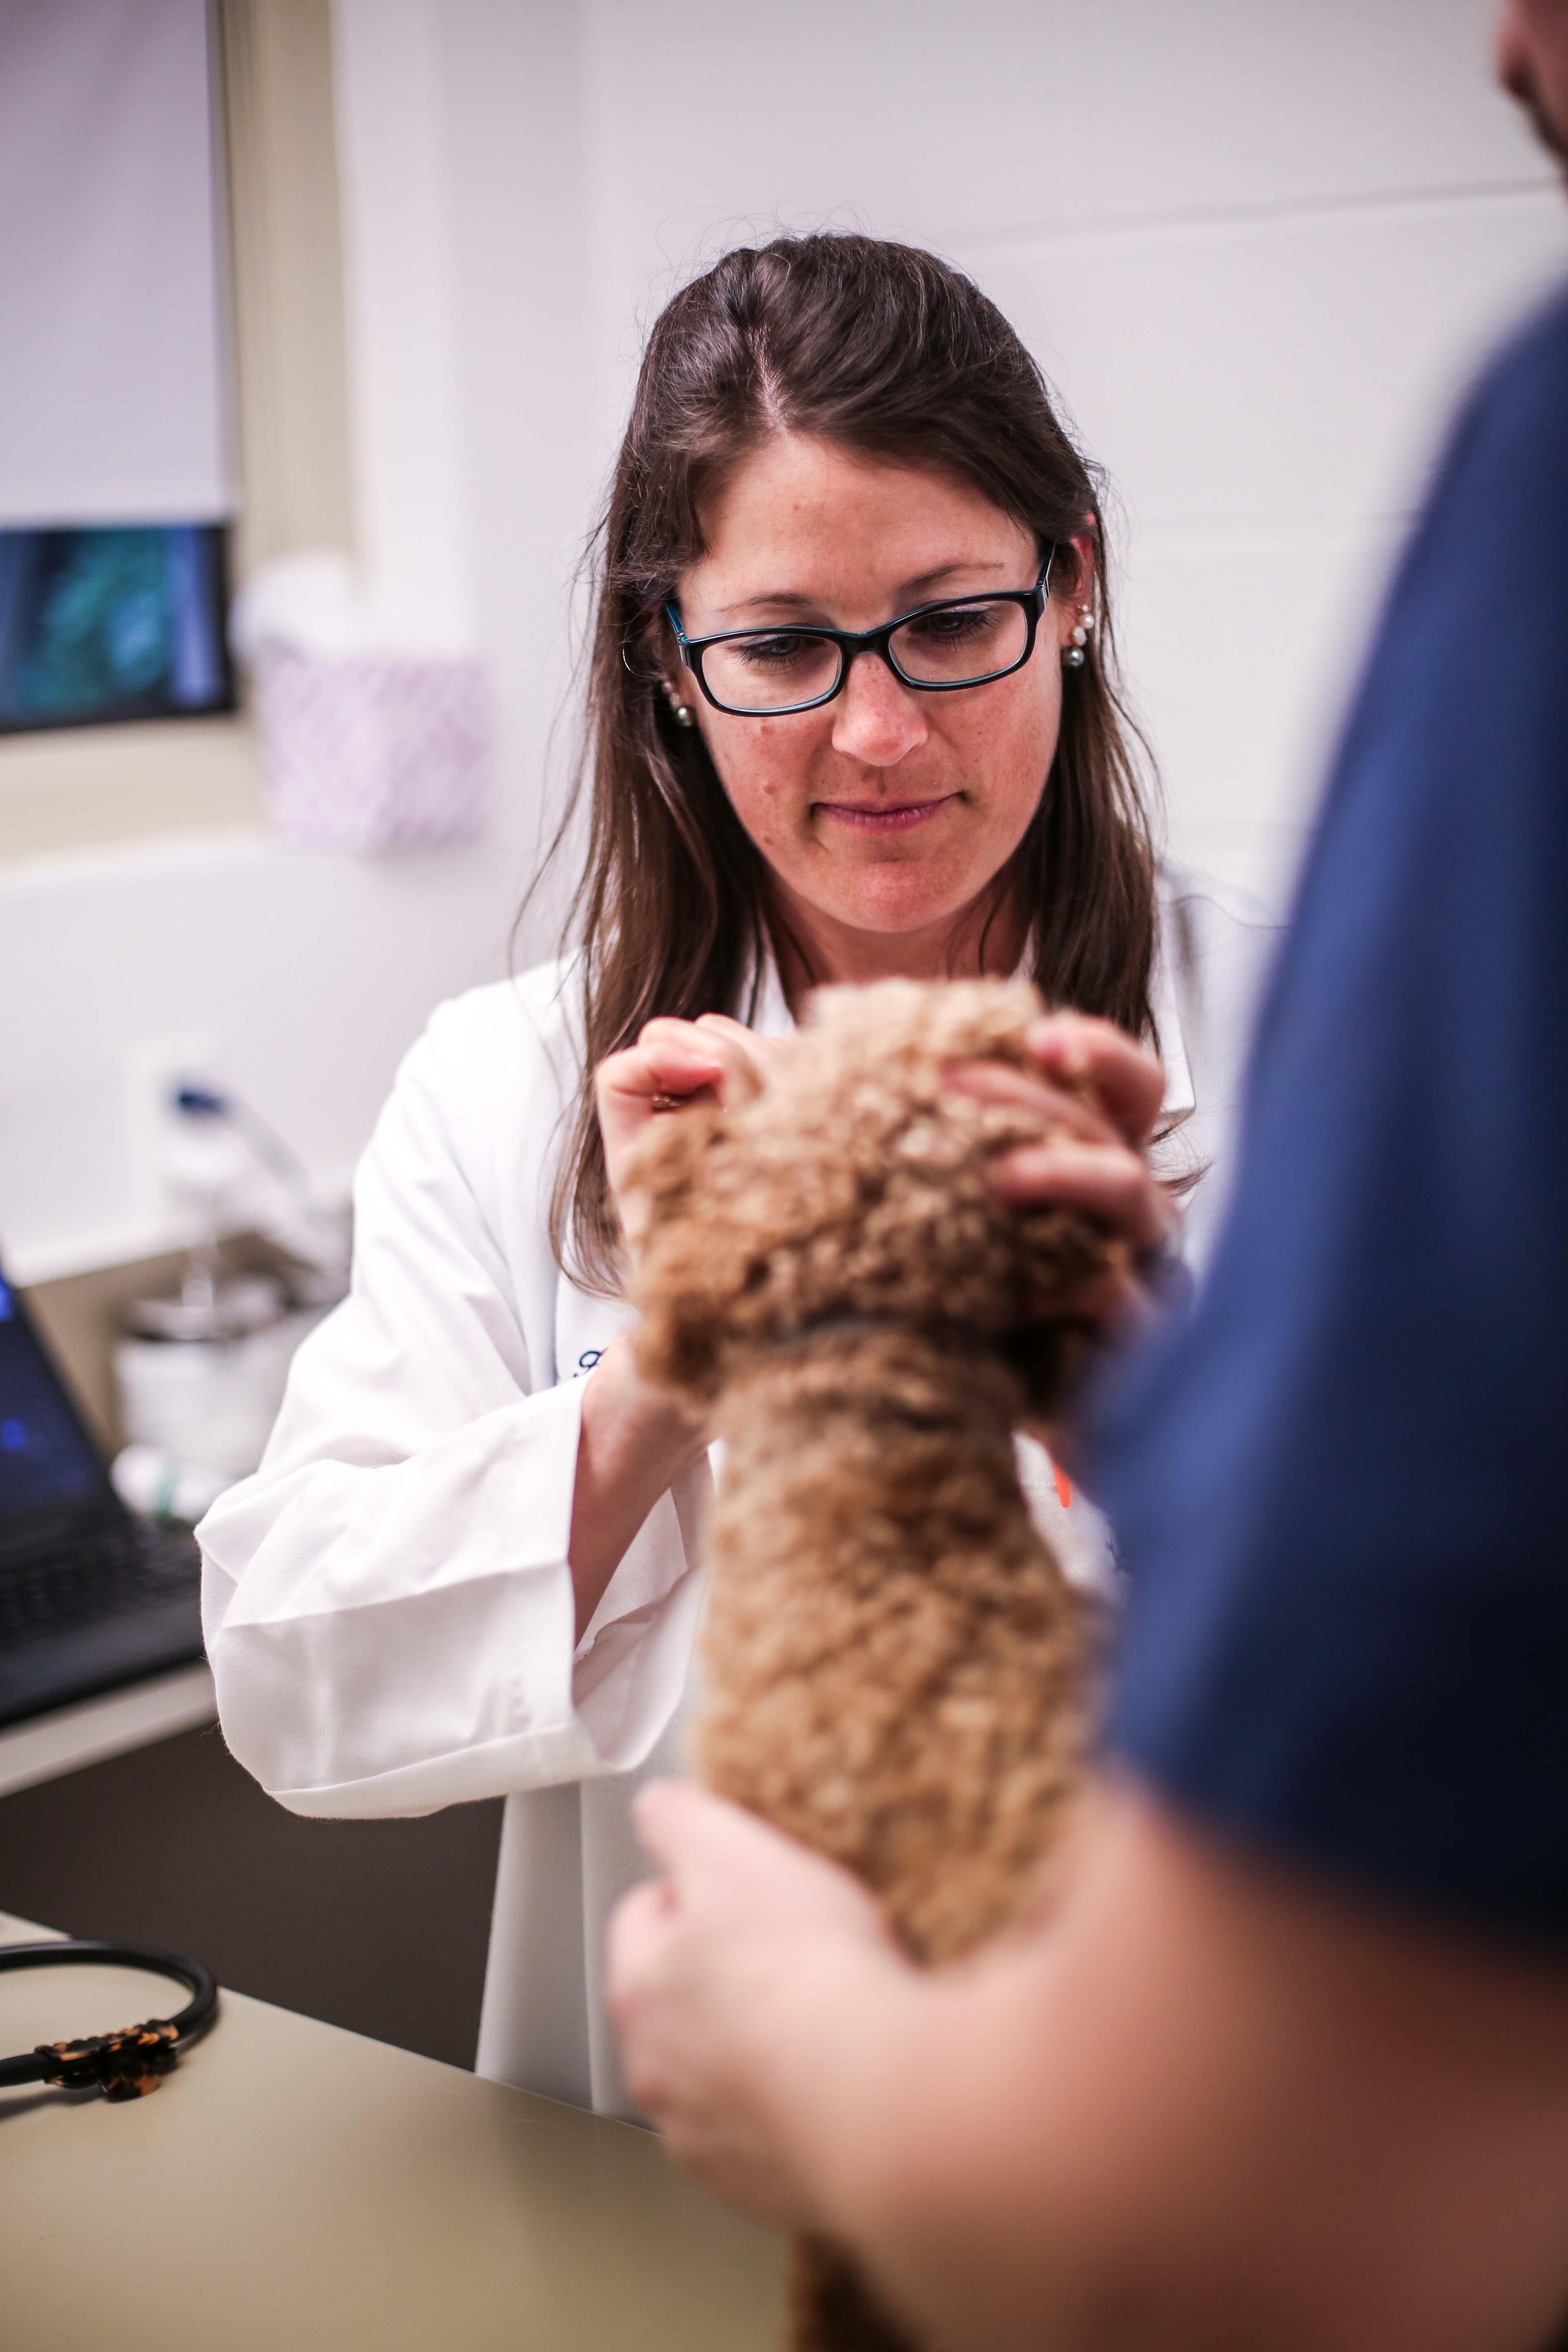 Dr. Schilke carefully examines a patient from nose to tail with the help of a veterinary technician.